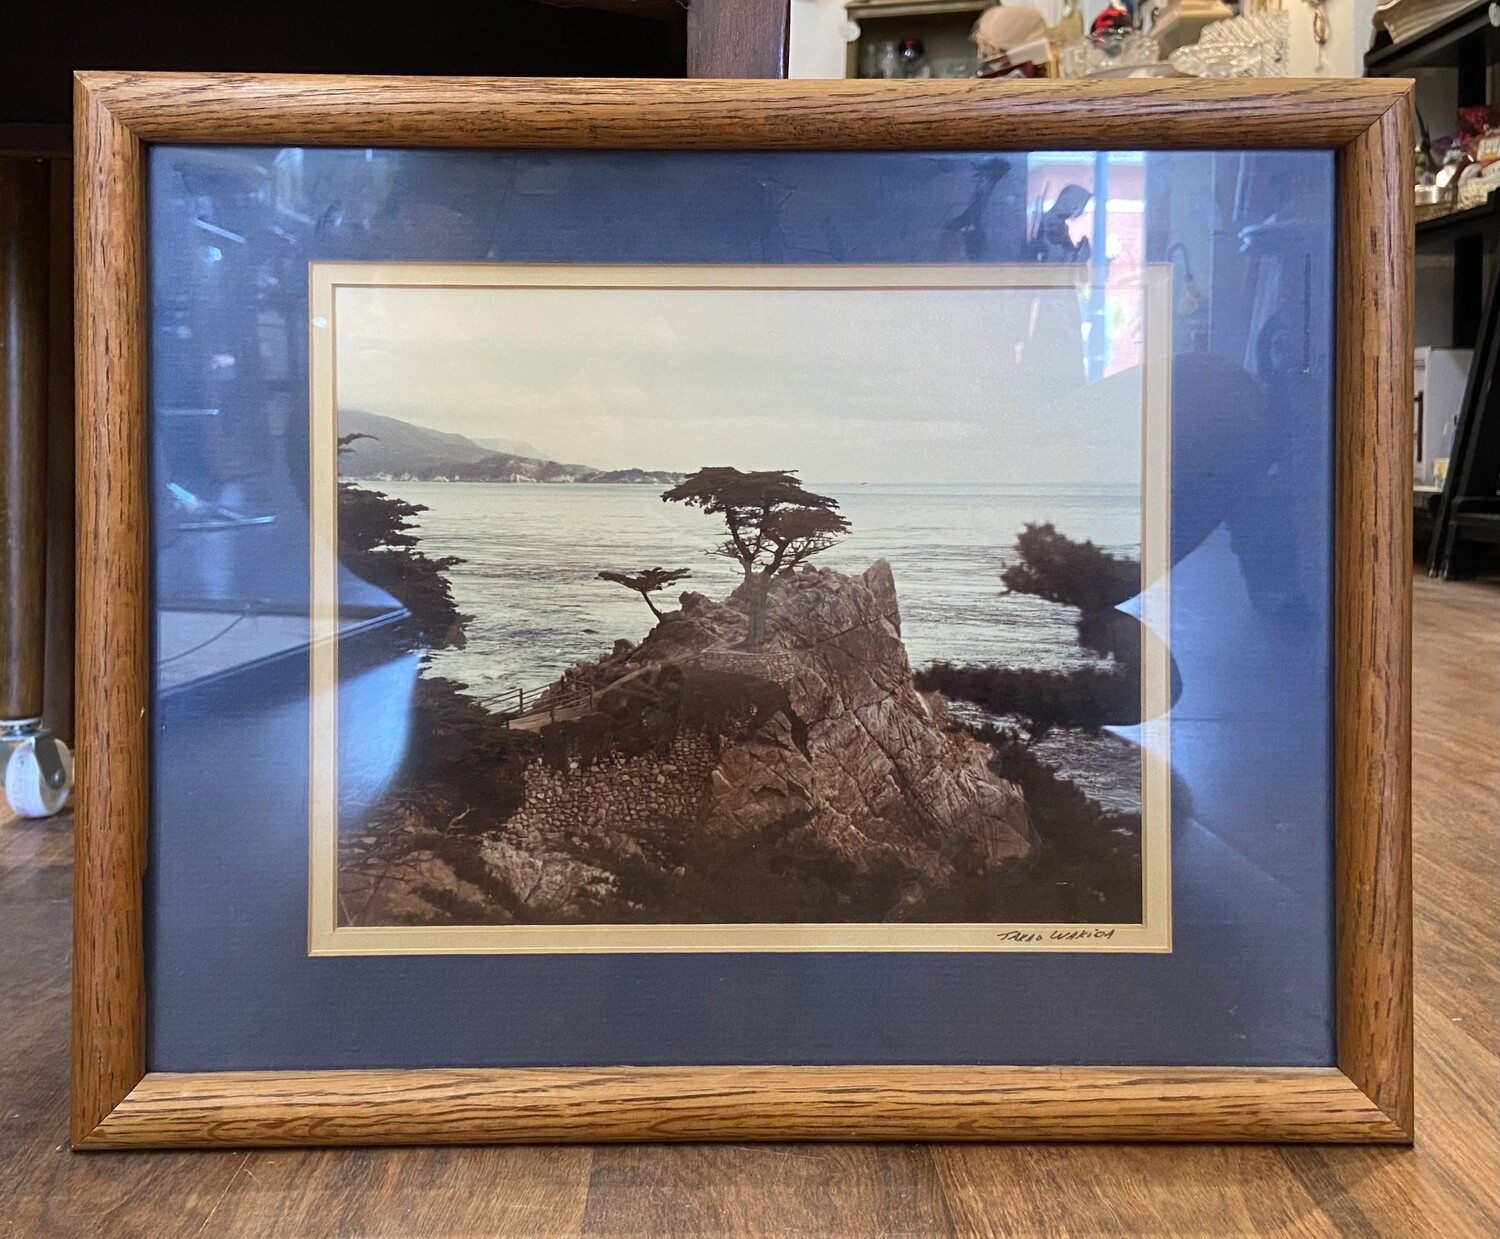 Signed and Framed Photo by Takeo Wakida